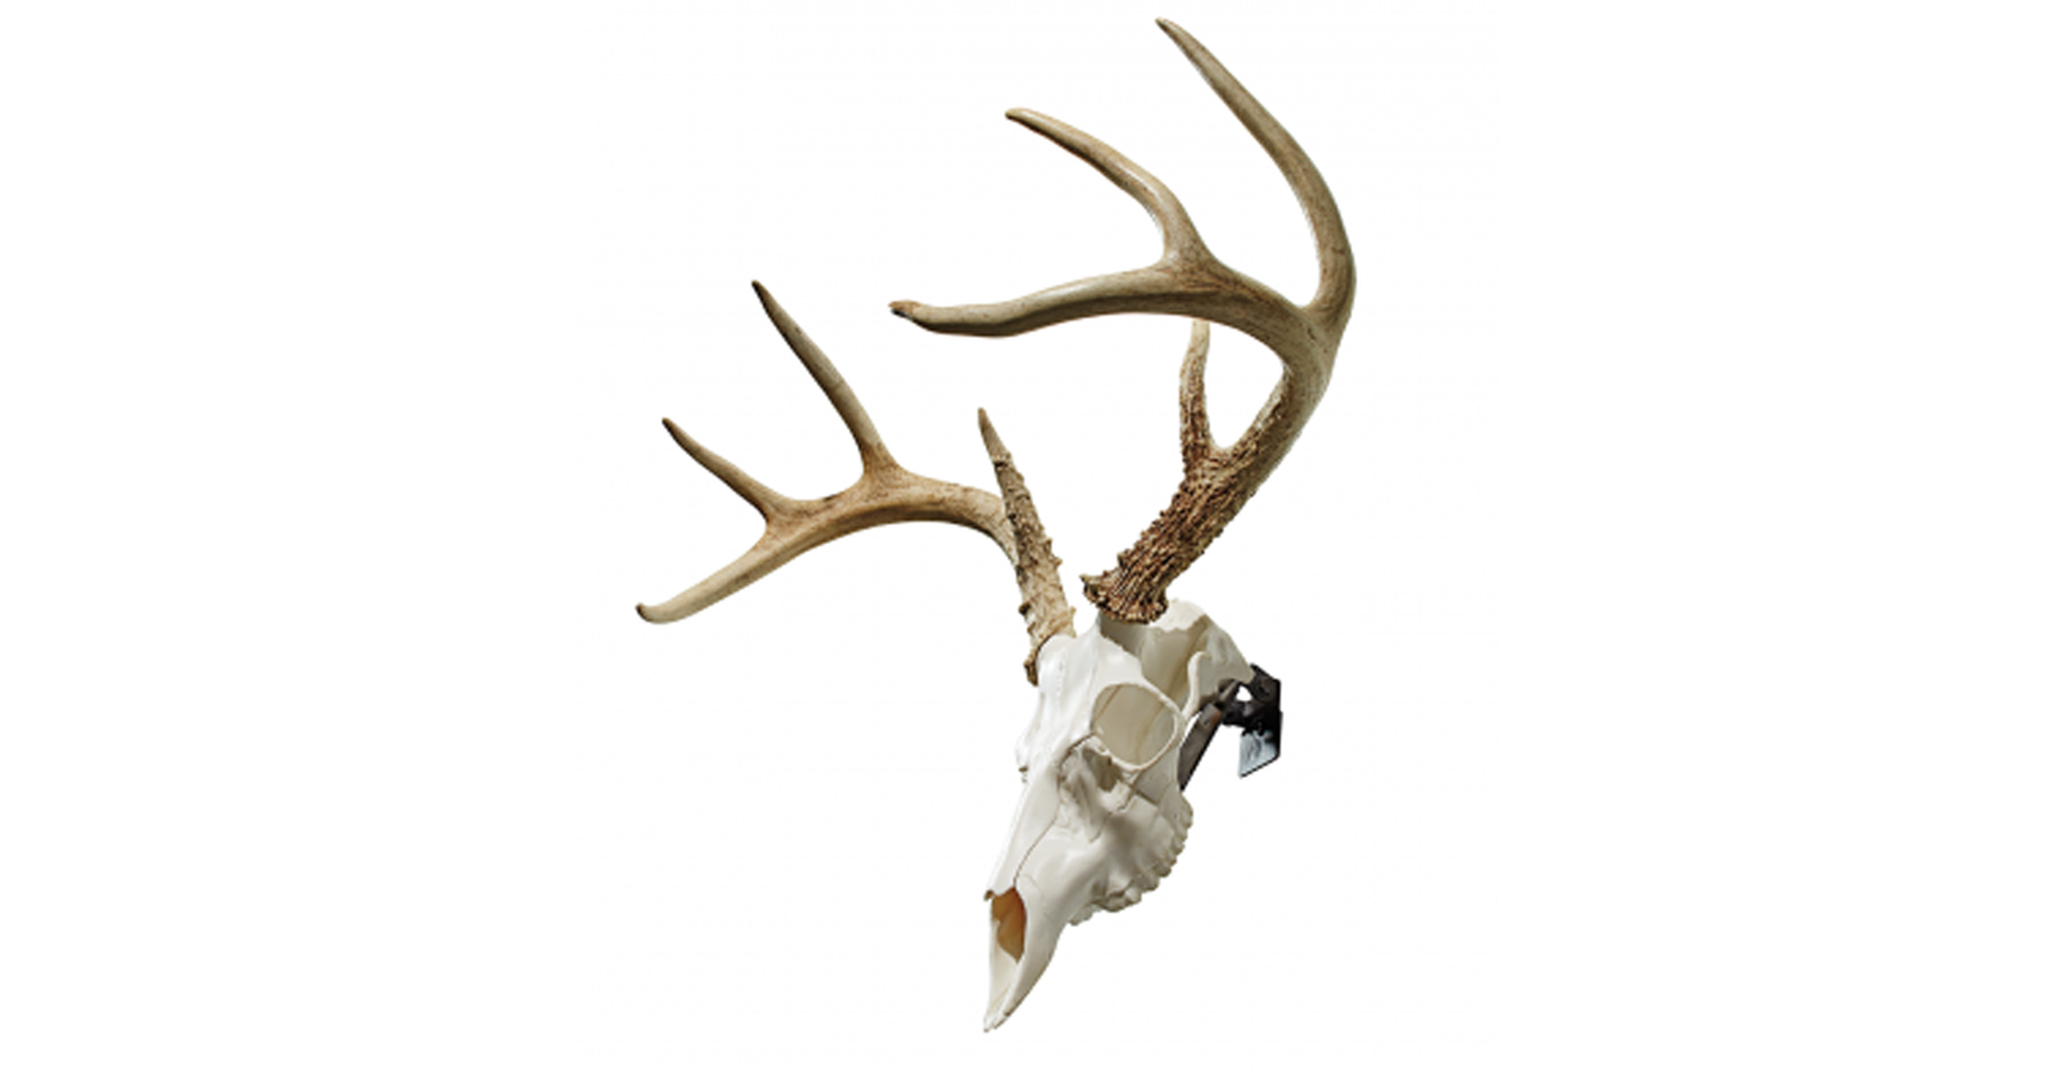 The Skull Master kit gives you the option of a full skull mount without the pains of dealing with the real skull.